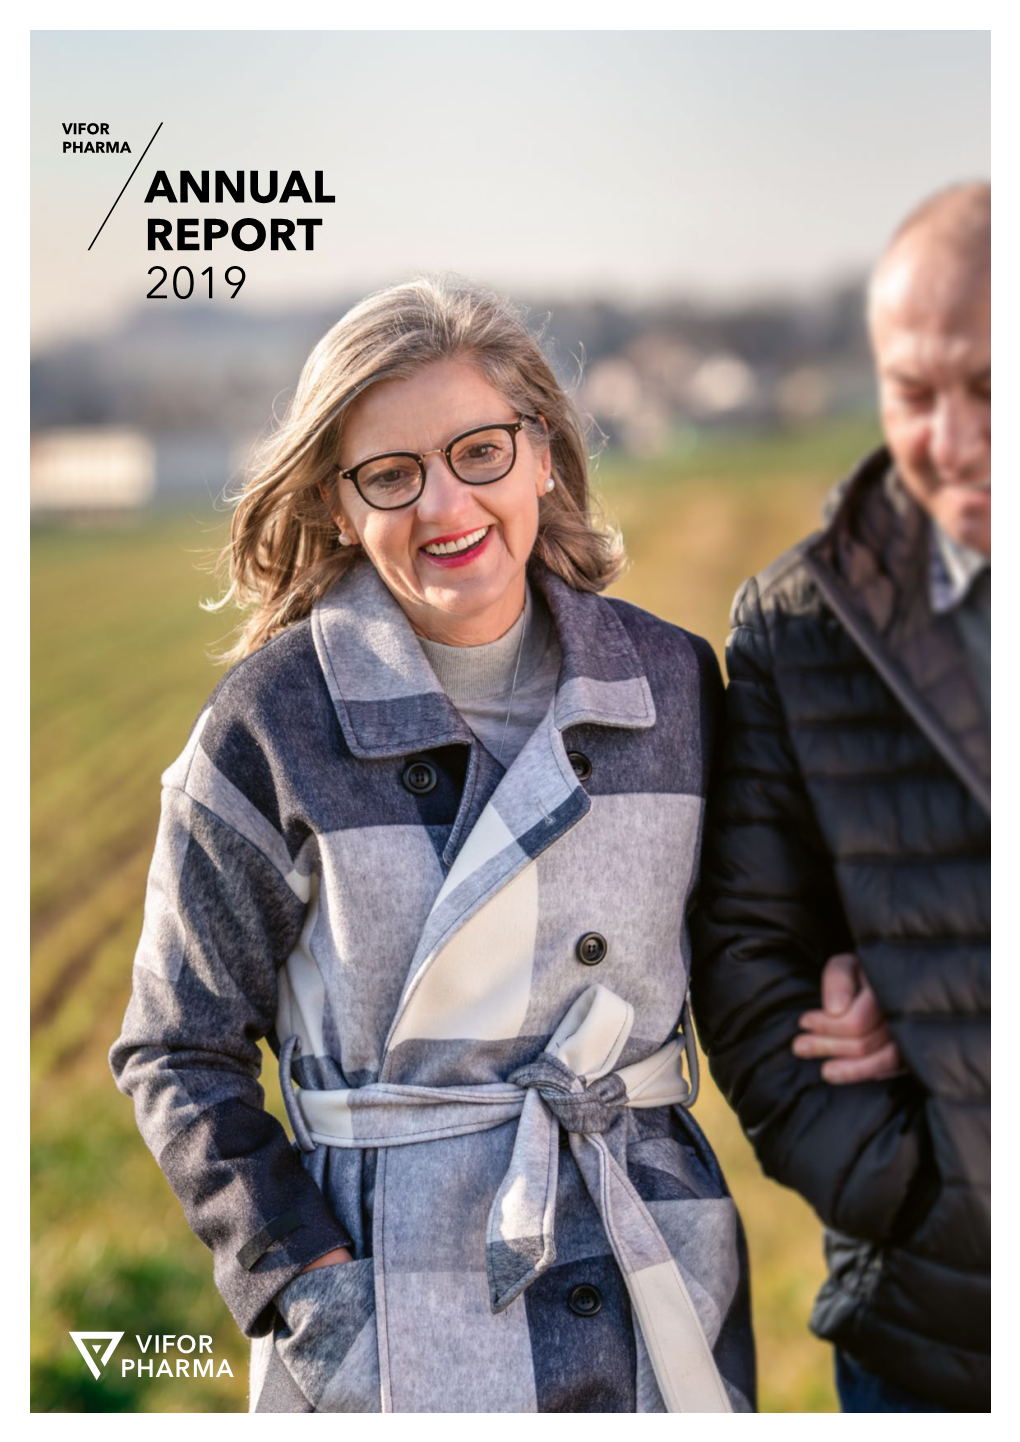 ANNUAL REPORT 2019 on the Cover Learn More About Christine’S Story ‘Facing Iron Deficiency’ Viforpharma.Com/Patients TABLE of CONTENTS